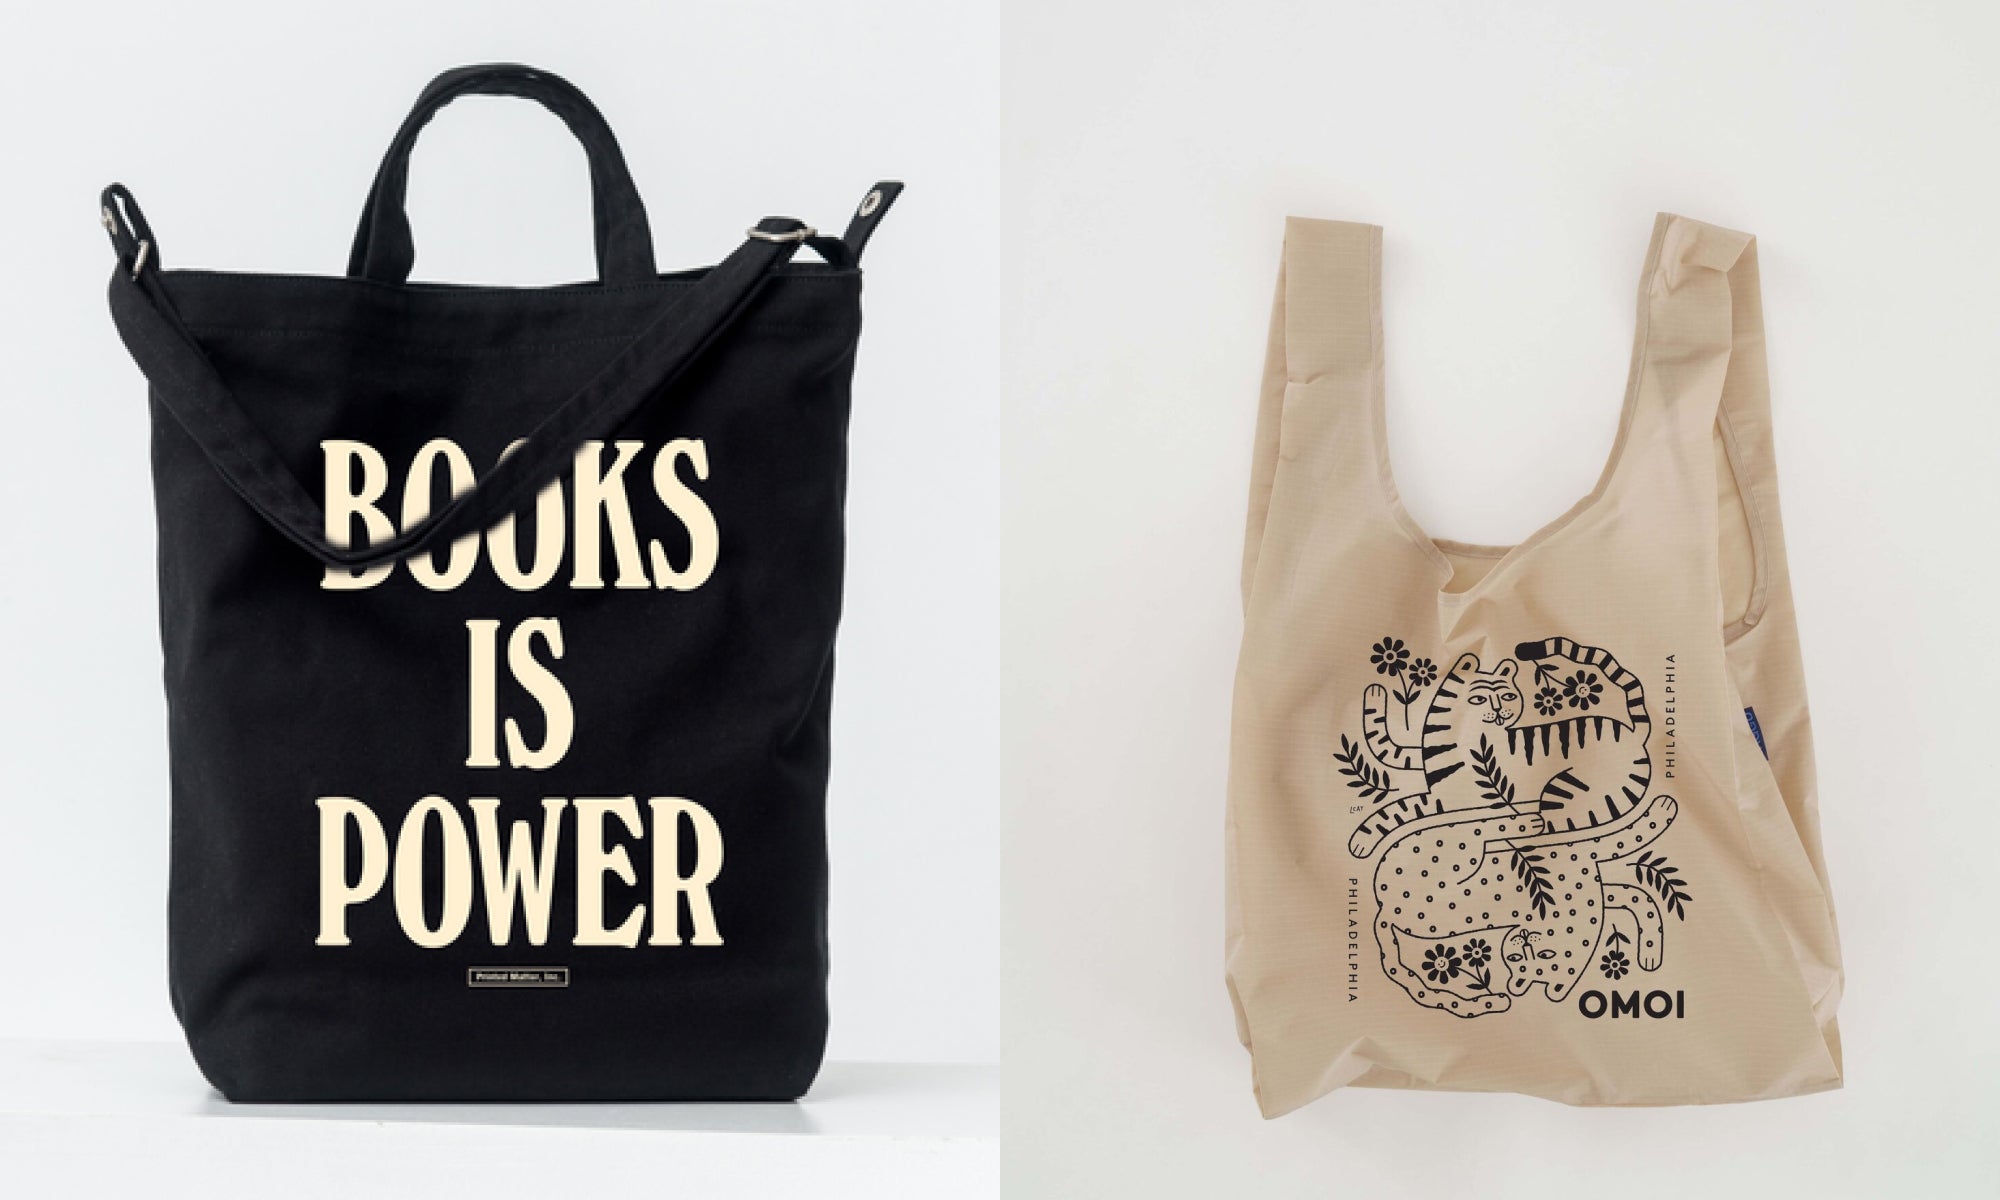 bulk tote bags personalized Online Sale